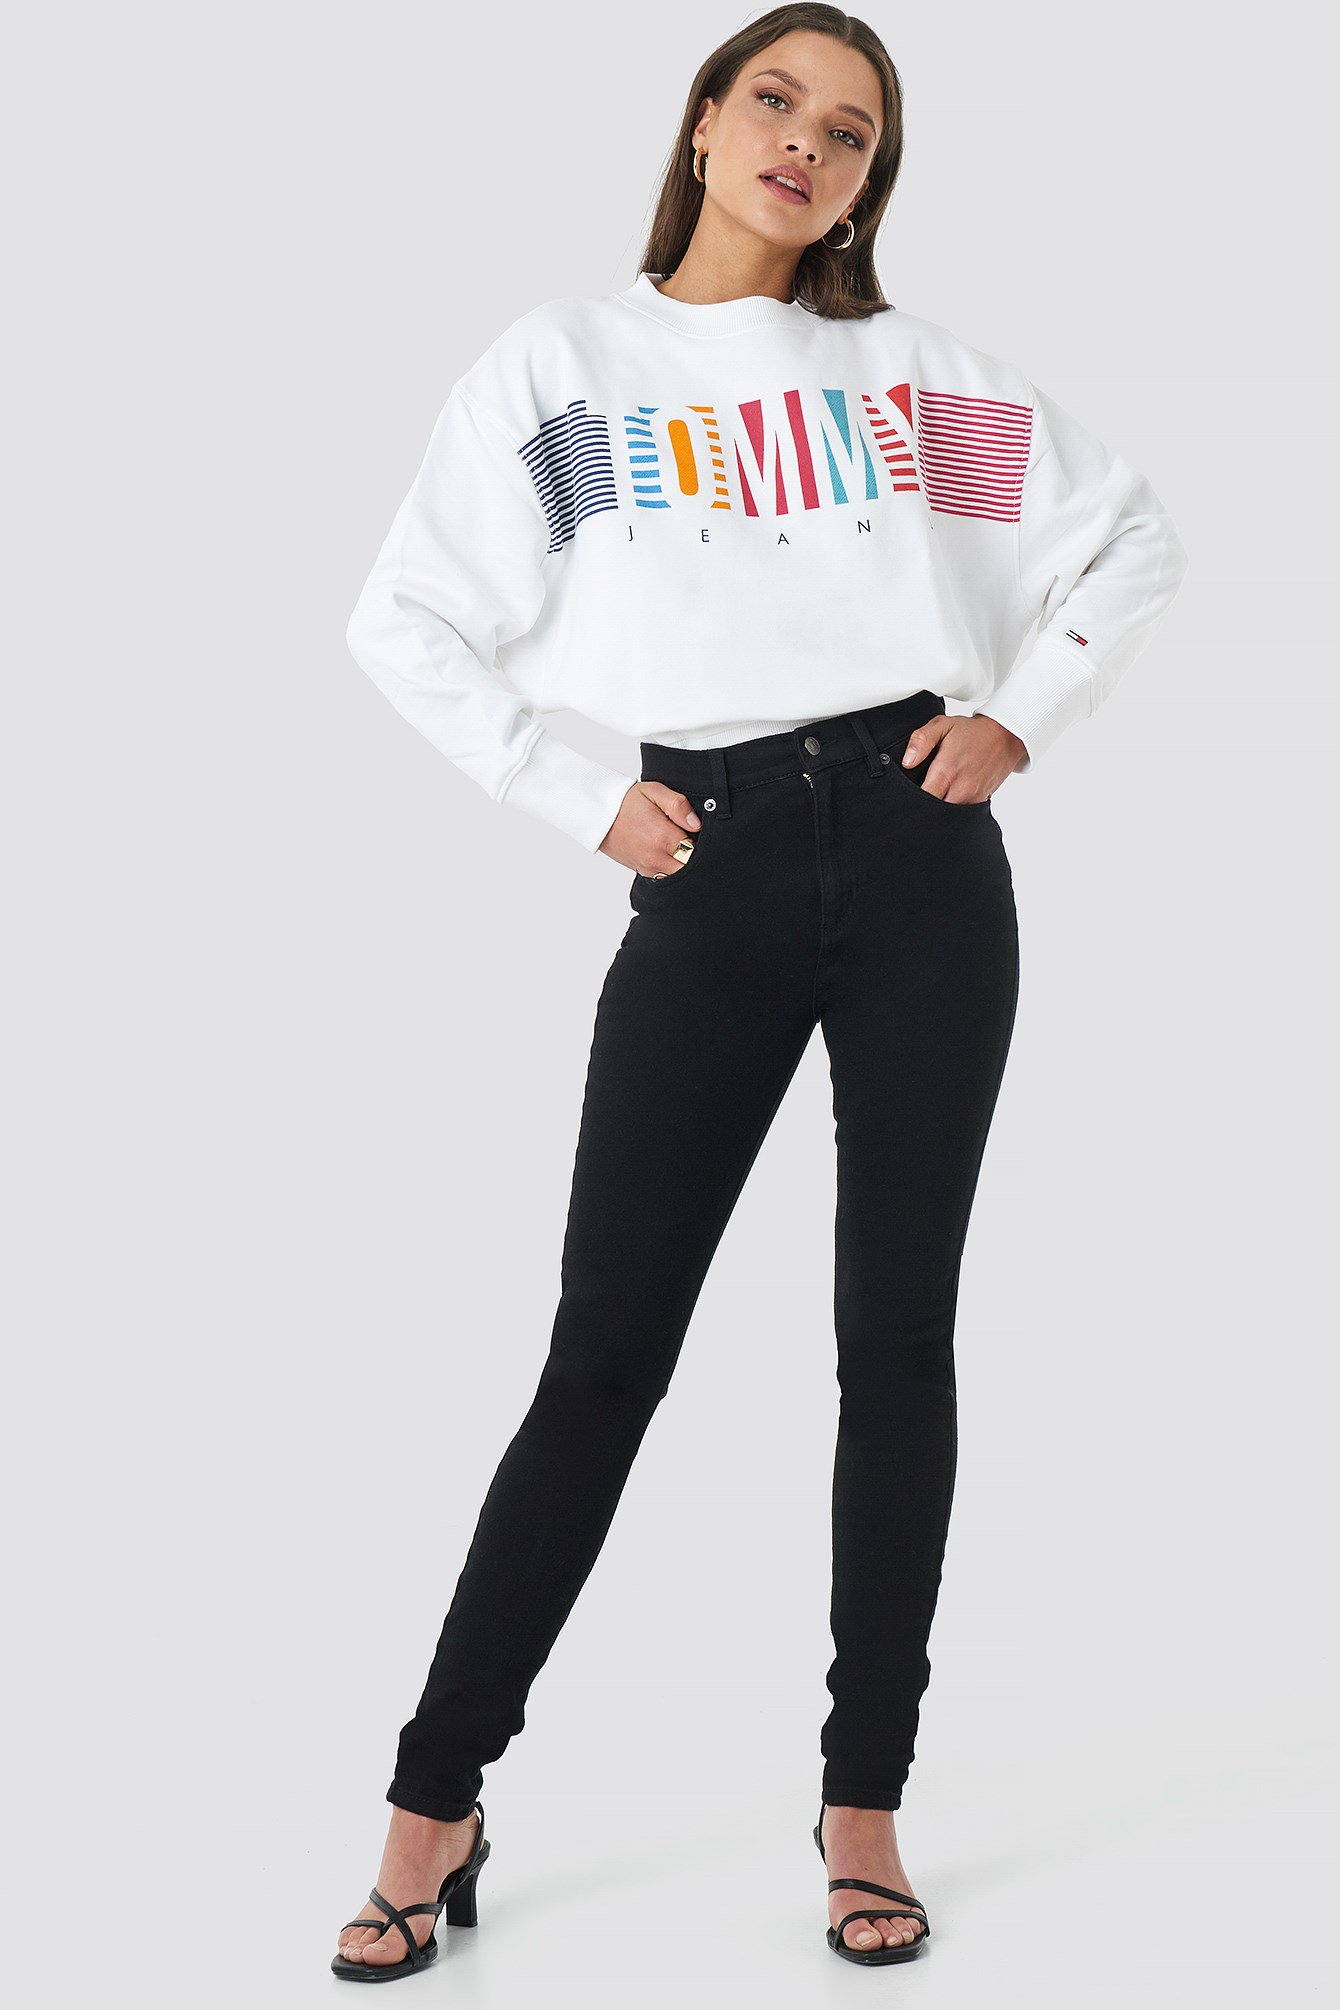 Colorful Block Tommy Crew Neck Outfit.